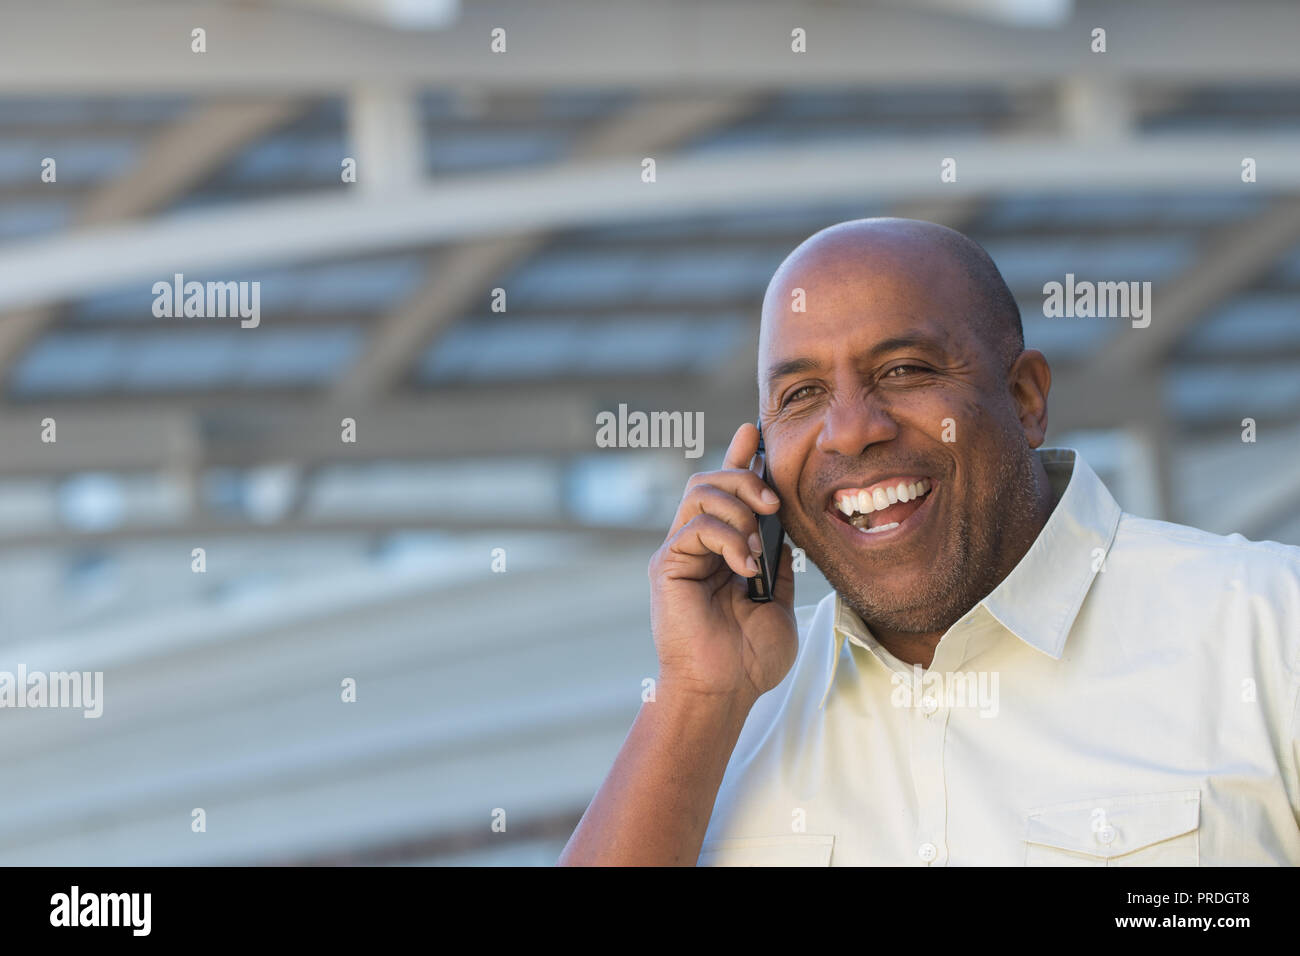 African American man smiling. Stock Photo